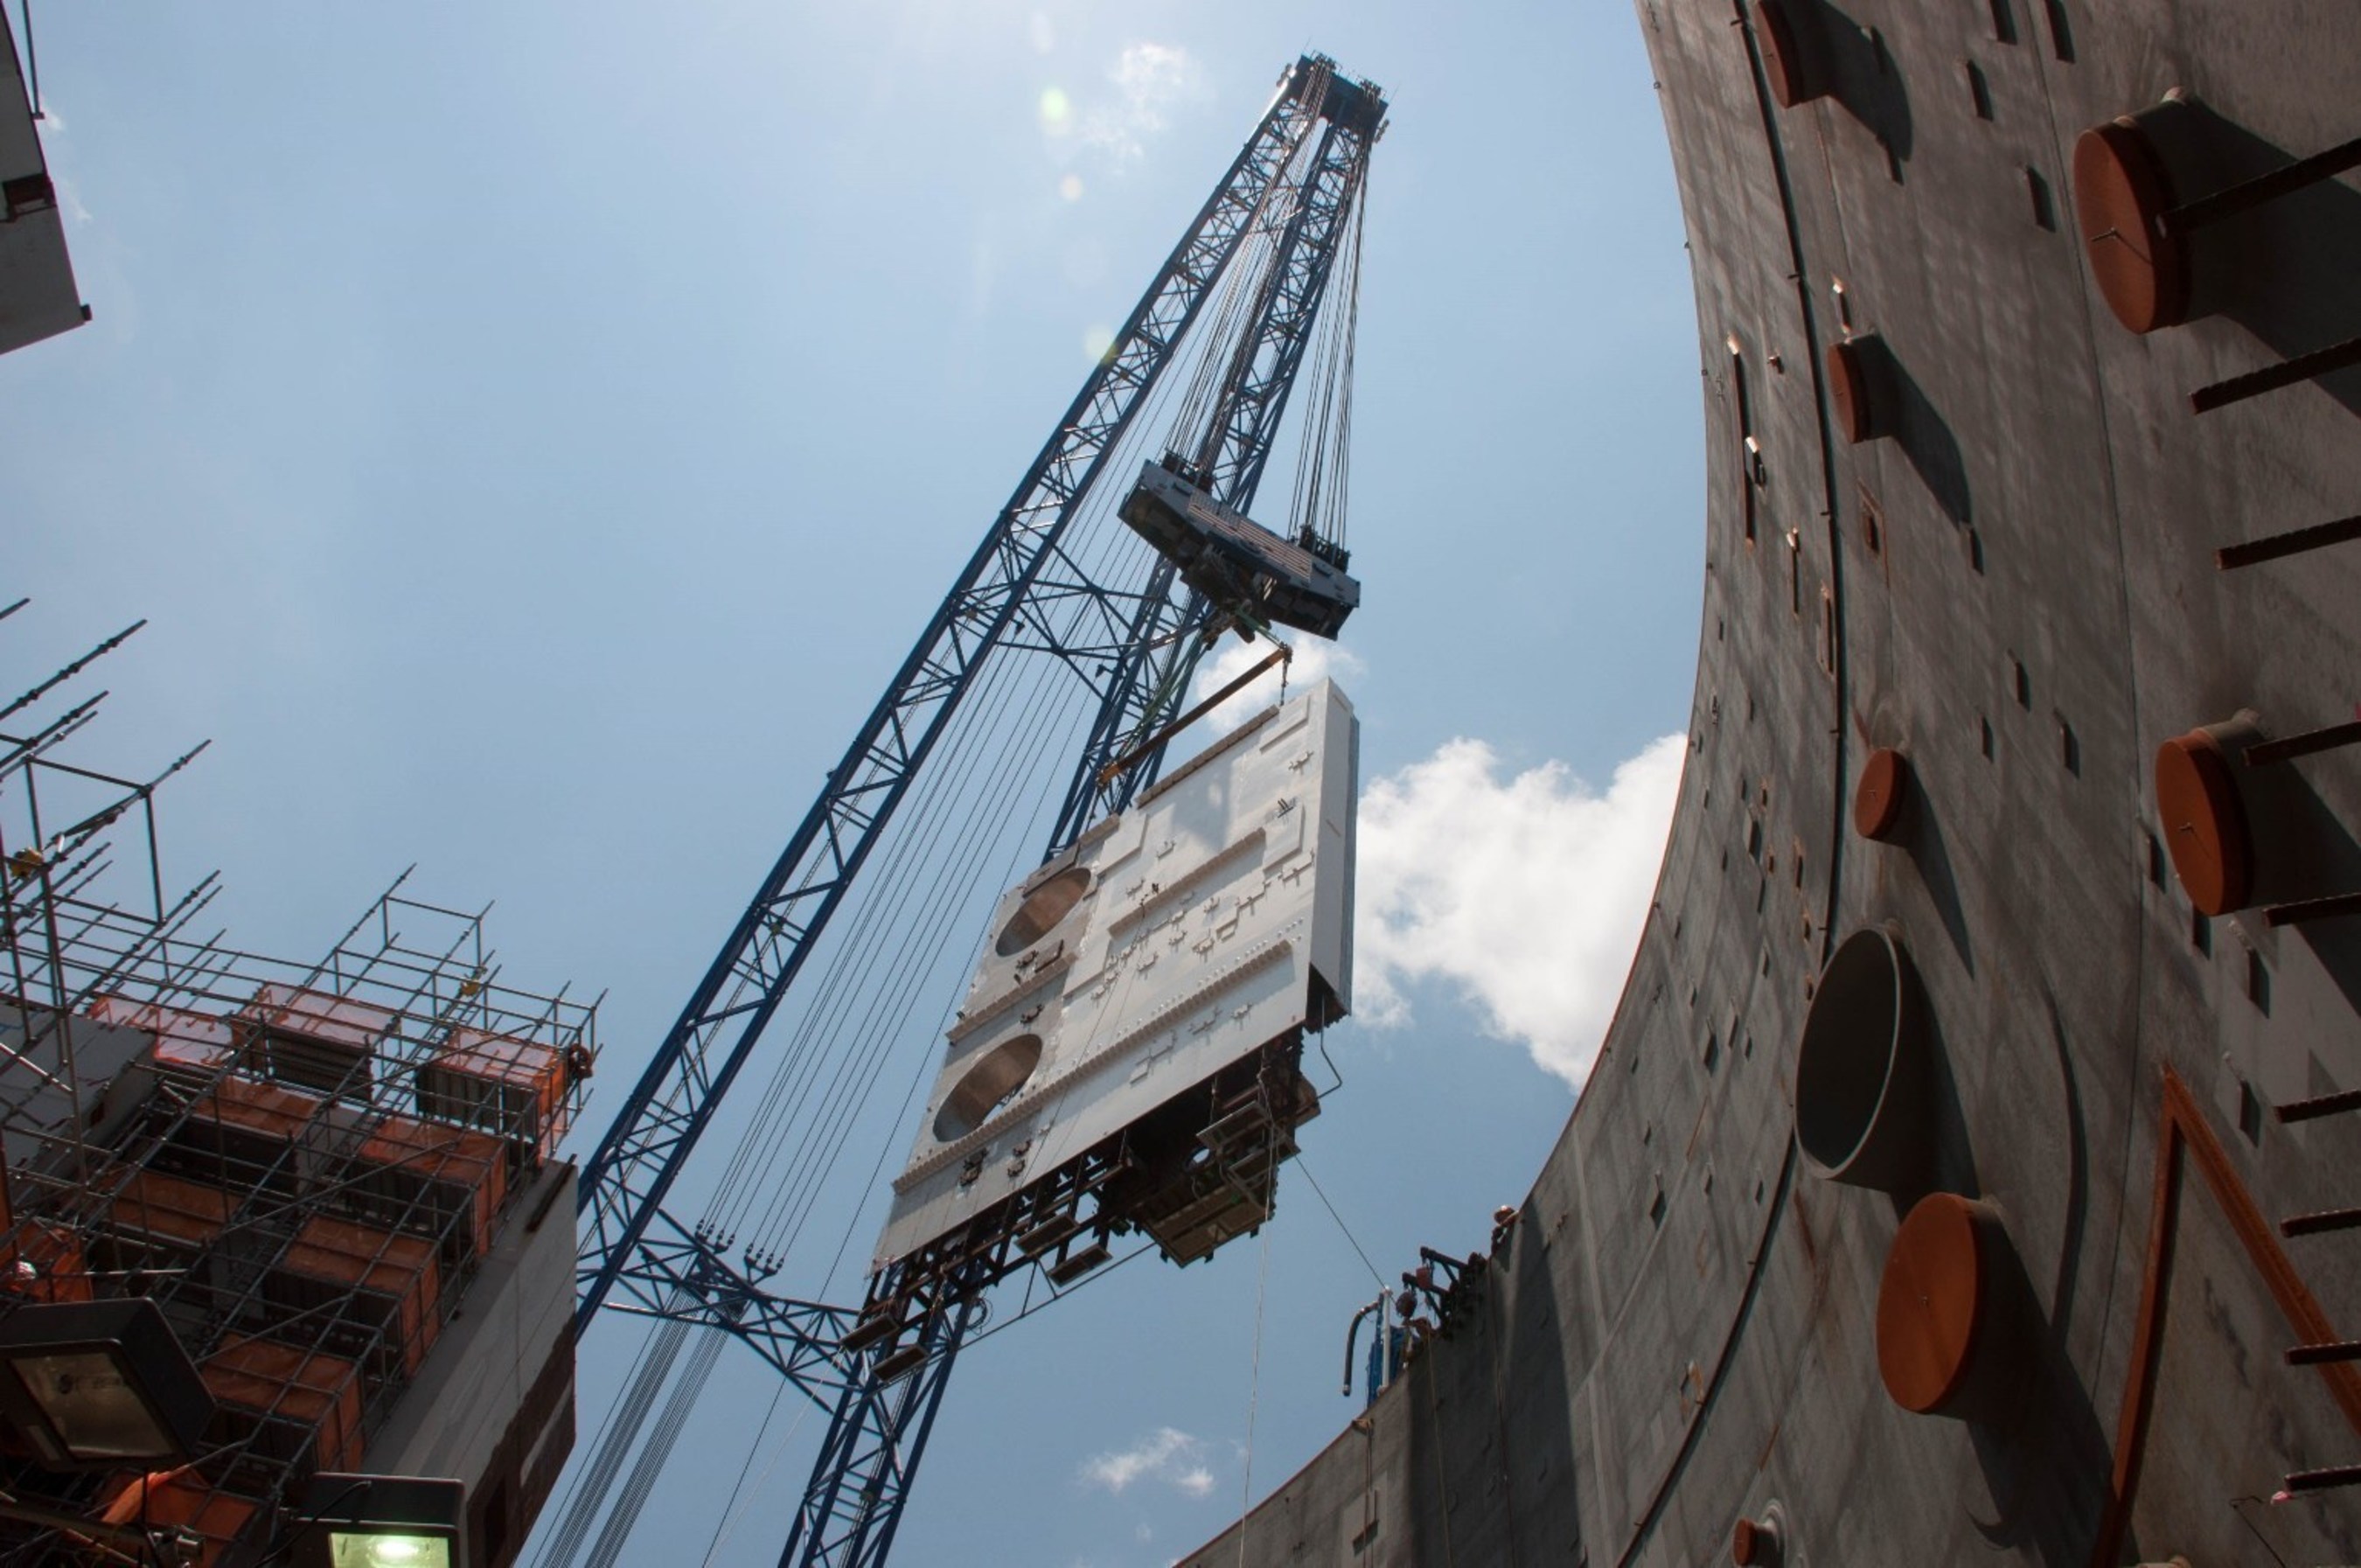 The CA02 module, weighing 52-tons, is lowered into place at the Vogtle Unit 3 nuclear island. This placement completes the "Big 6" modules for Unit 3 which also include the previously placed CA01, CA04, CA05 and CA20.